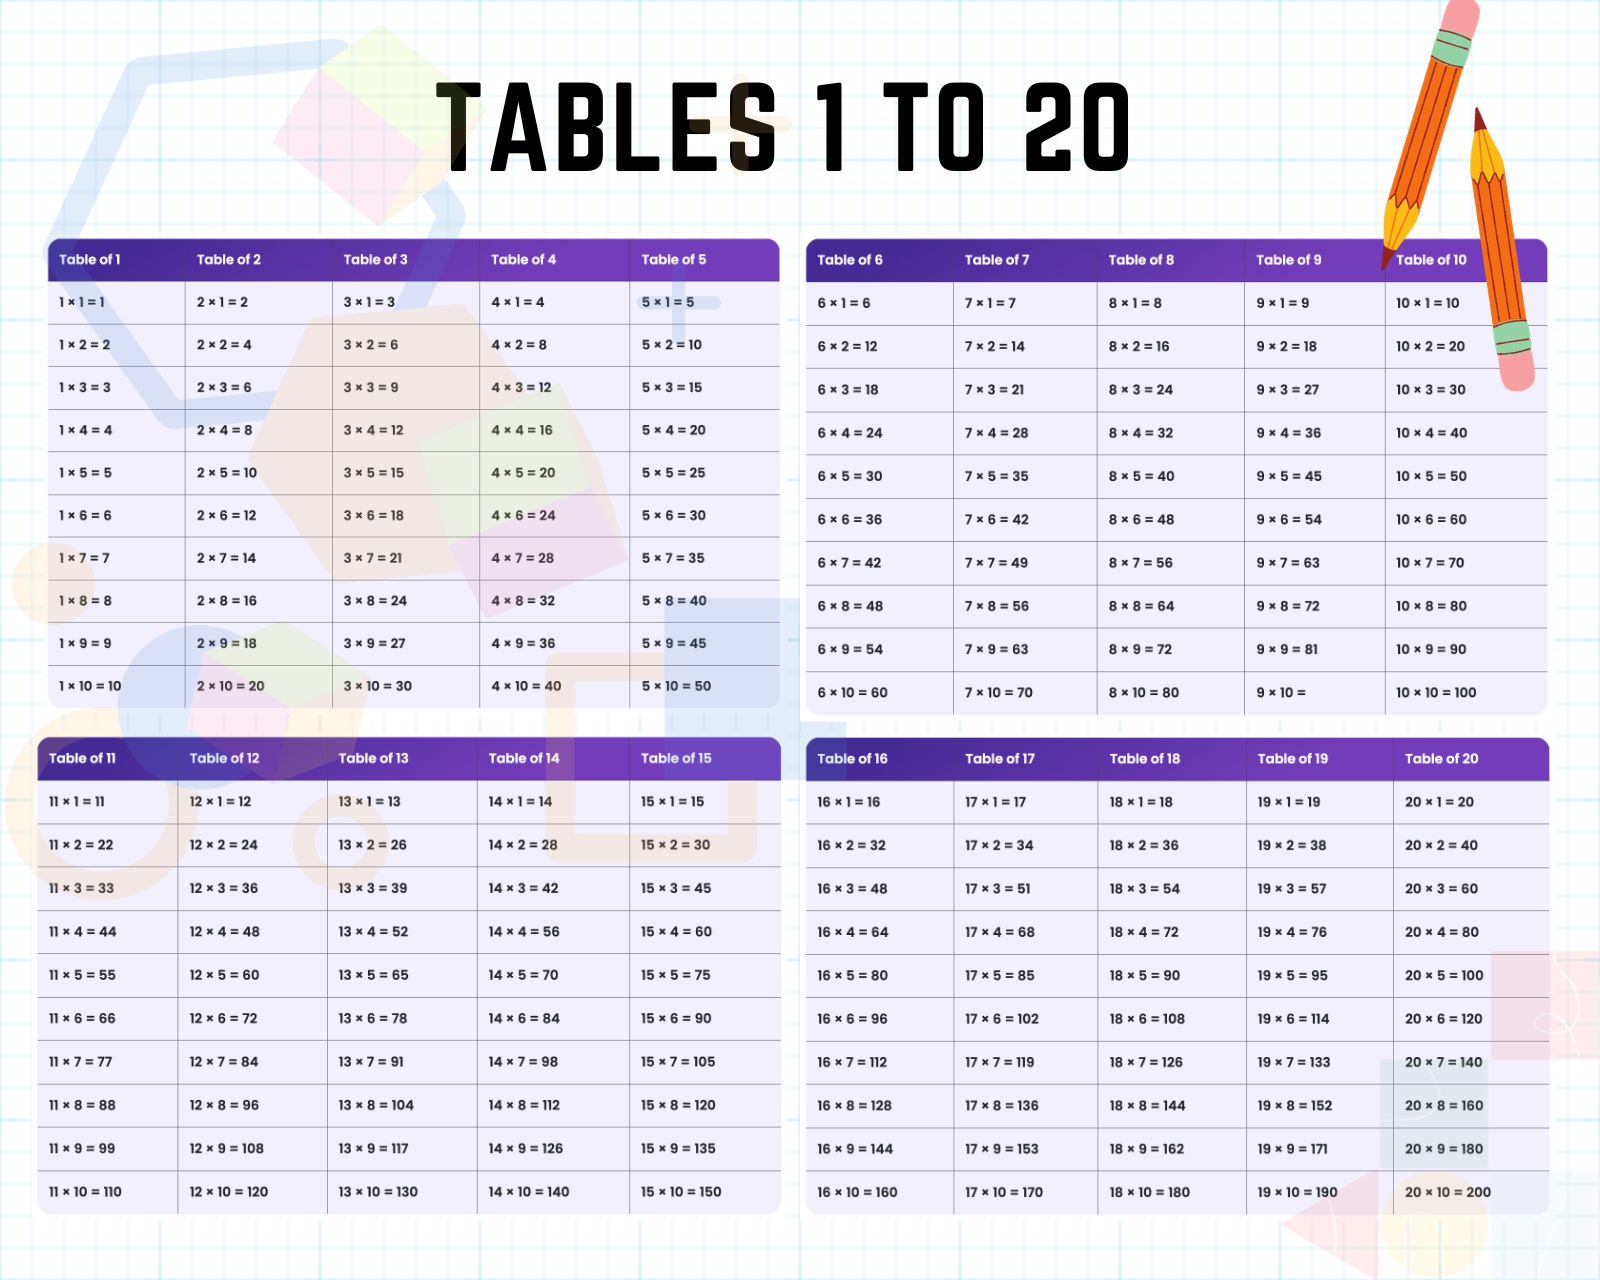 Tables 1 to 20 pdf file download